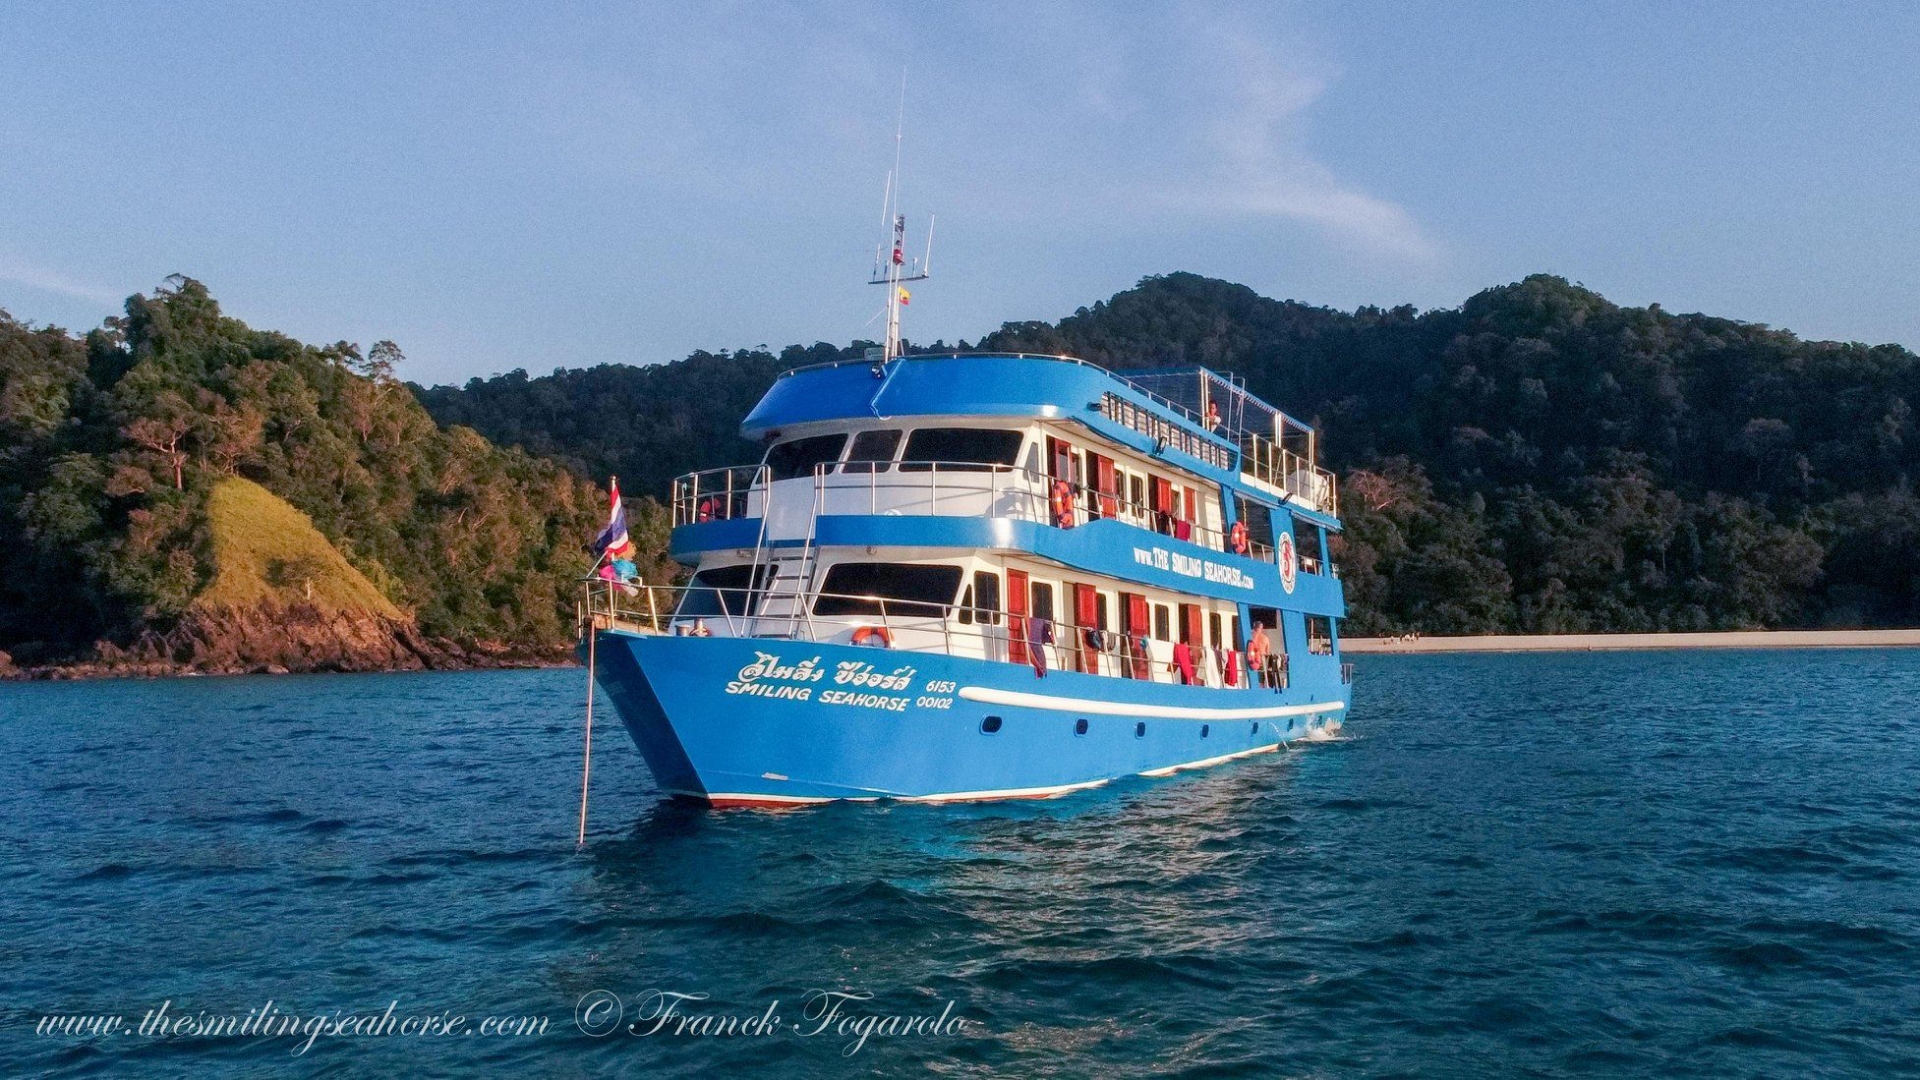 MV Smiling Seahorse Photographers First Choice